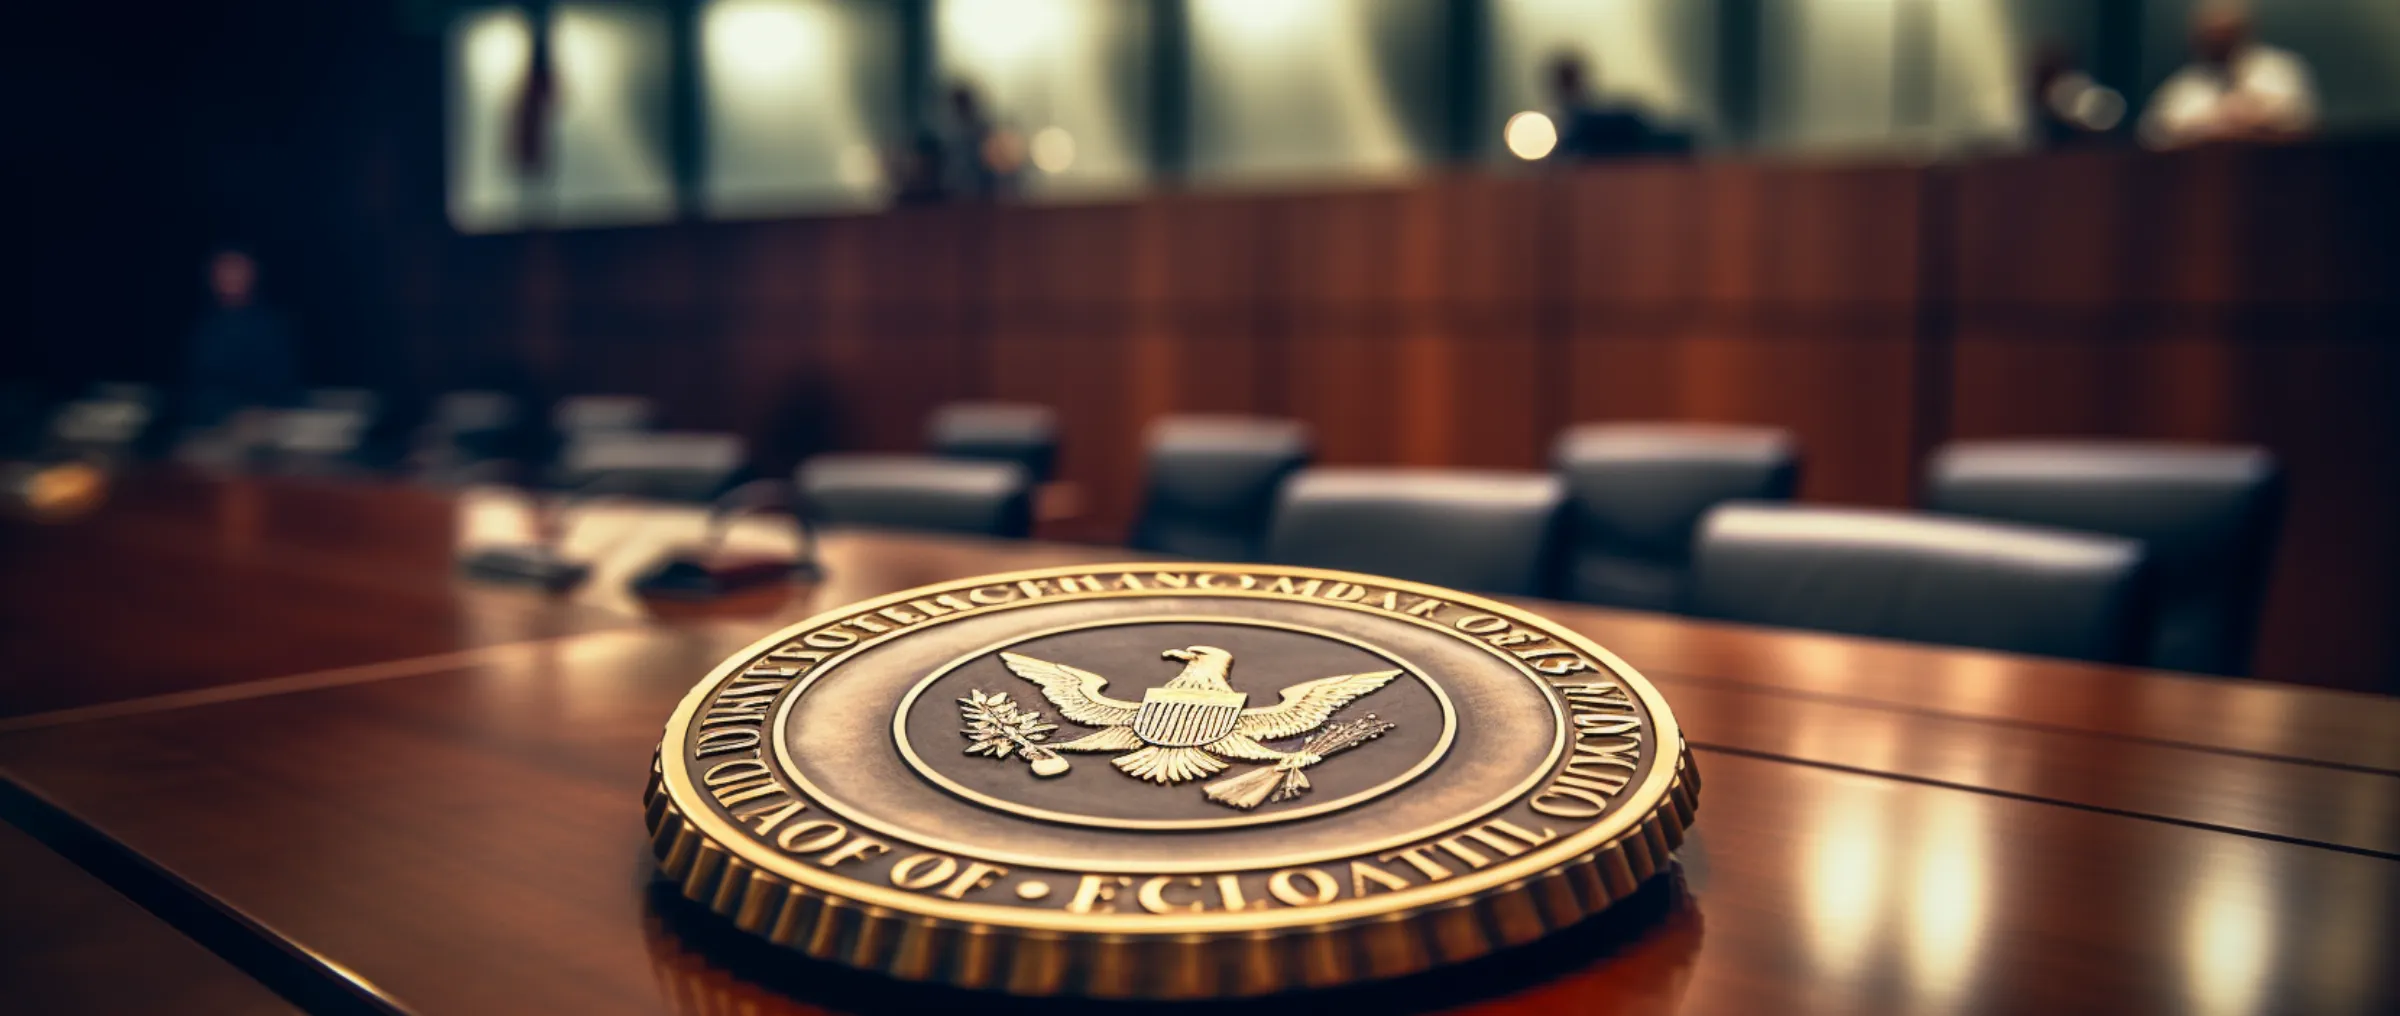 SEC pressured by Coinbase: US court involvement sought